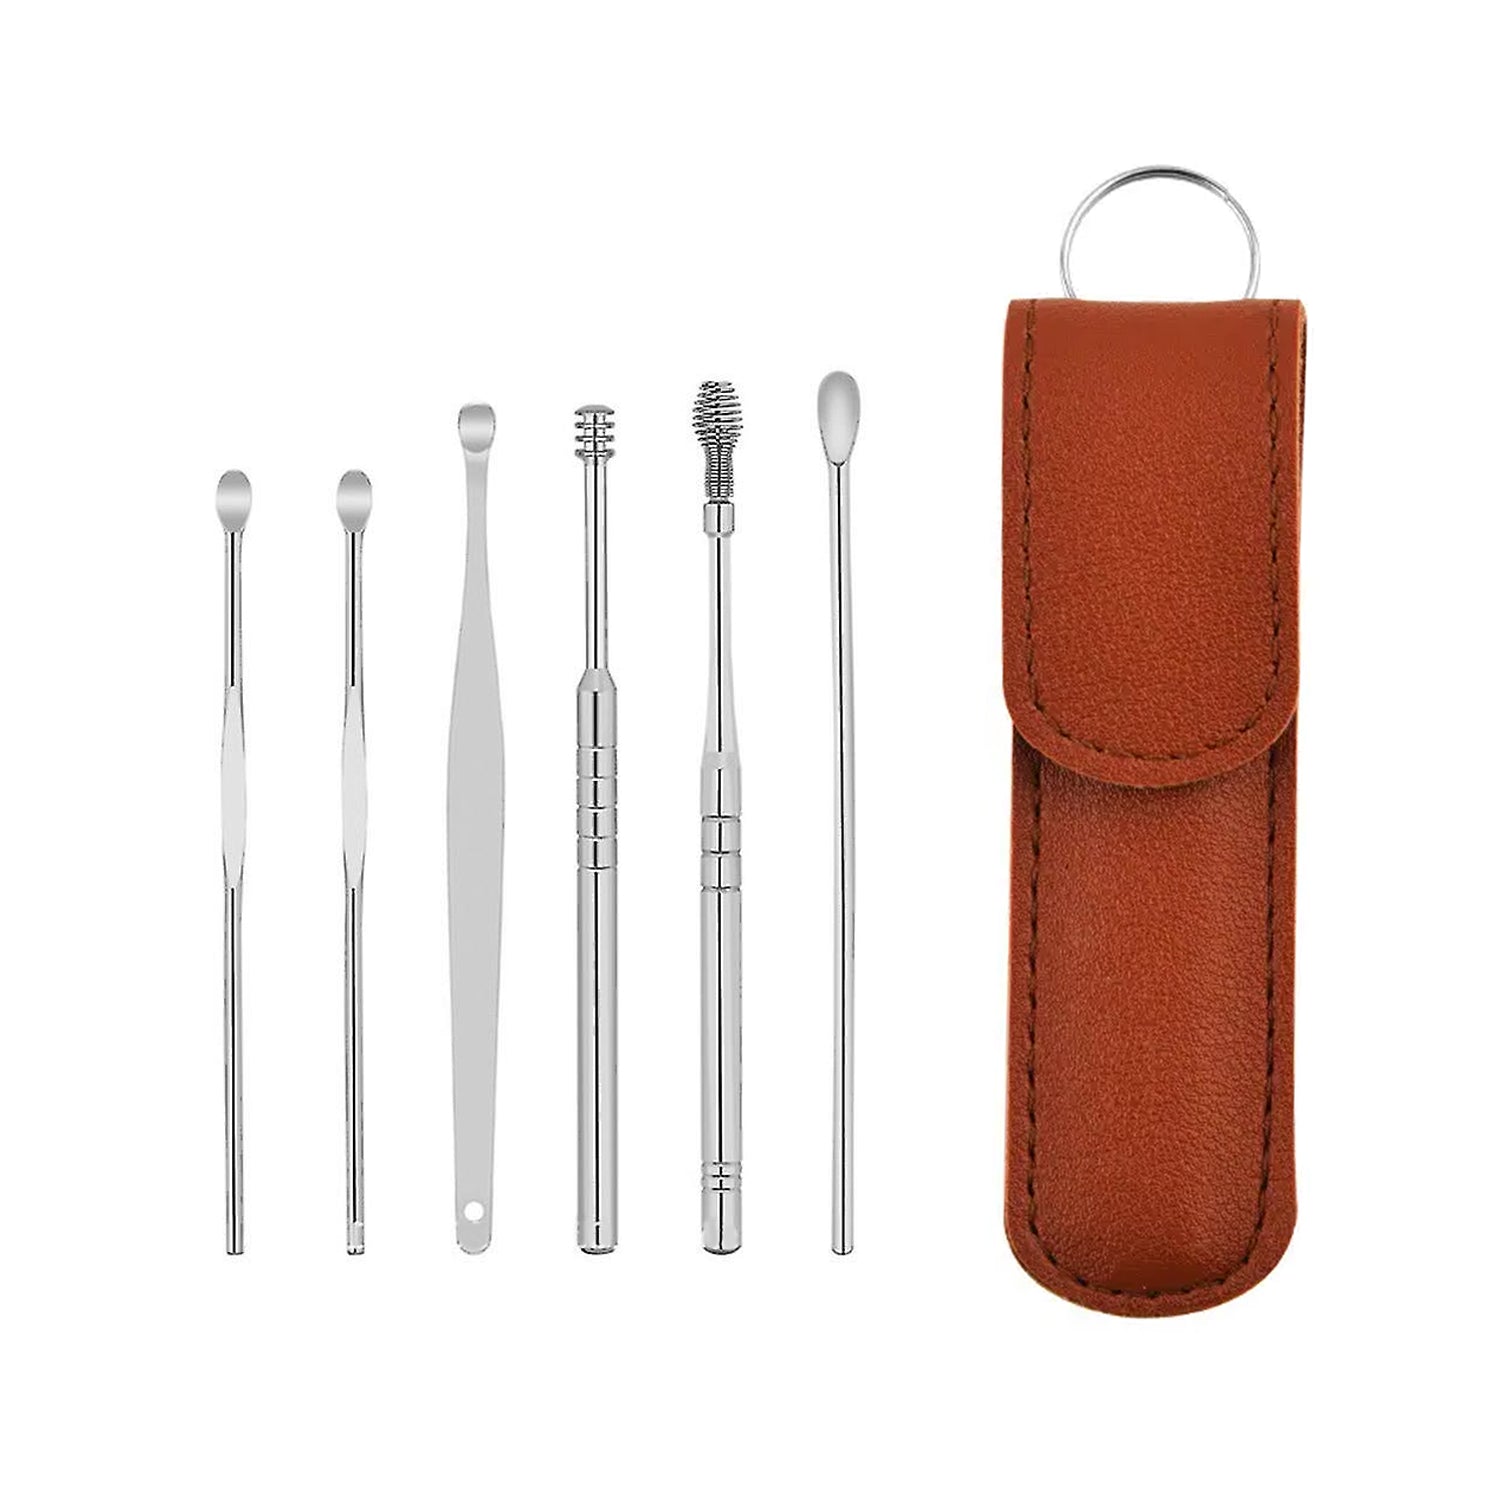 6317   6-in-1 Ear Wax Cleaner- Resuable Ear Cleaning Tools Leather Pouch - Ear Pick Wax Remover Tool Kit with Ear Curette Cleaner and Spring Ear Buds Cleaner Fit in Pocket Great for Traveling DeoDap